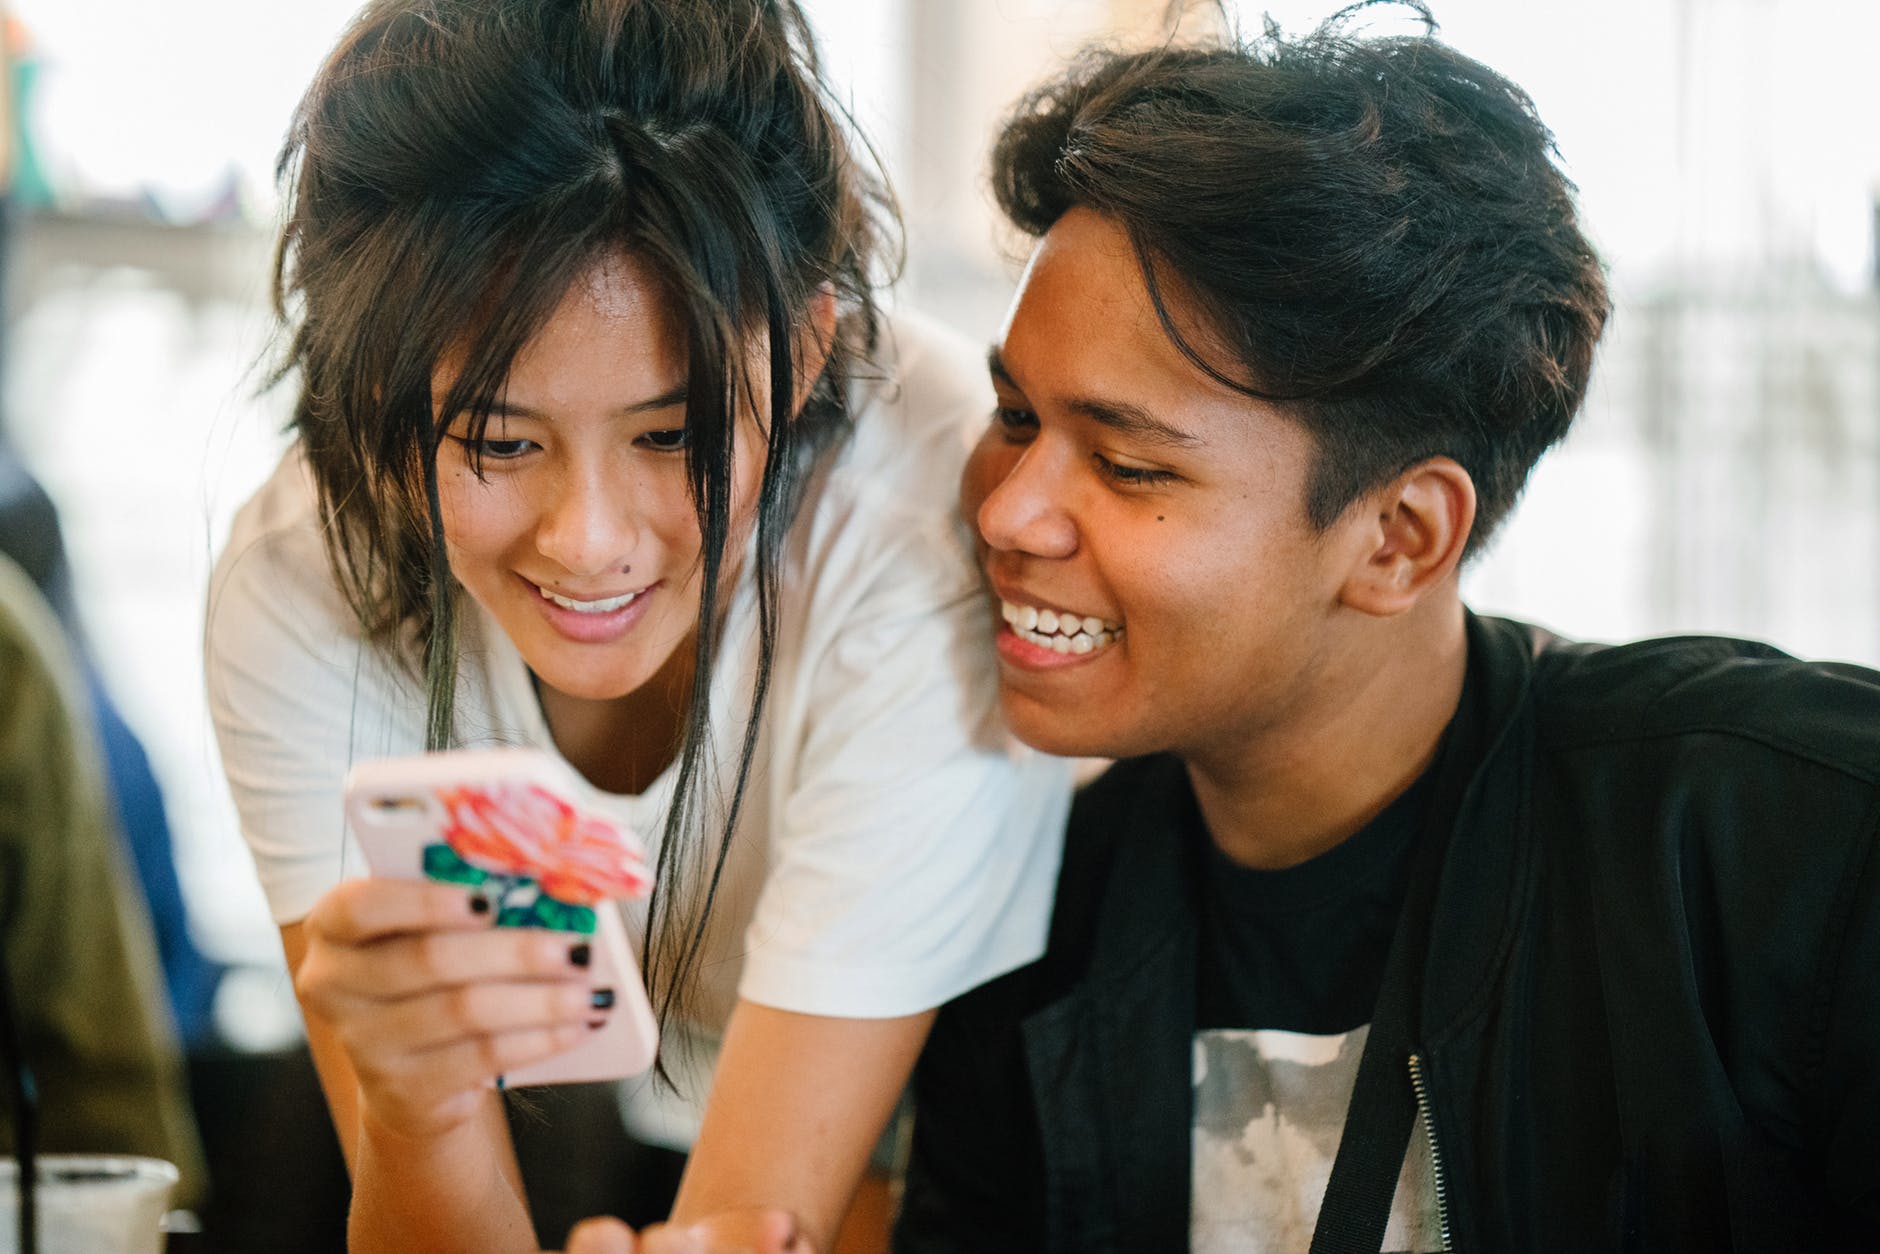 What You Need to Know About Marketing to Generation Z